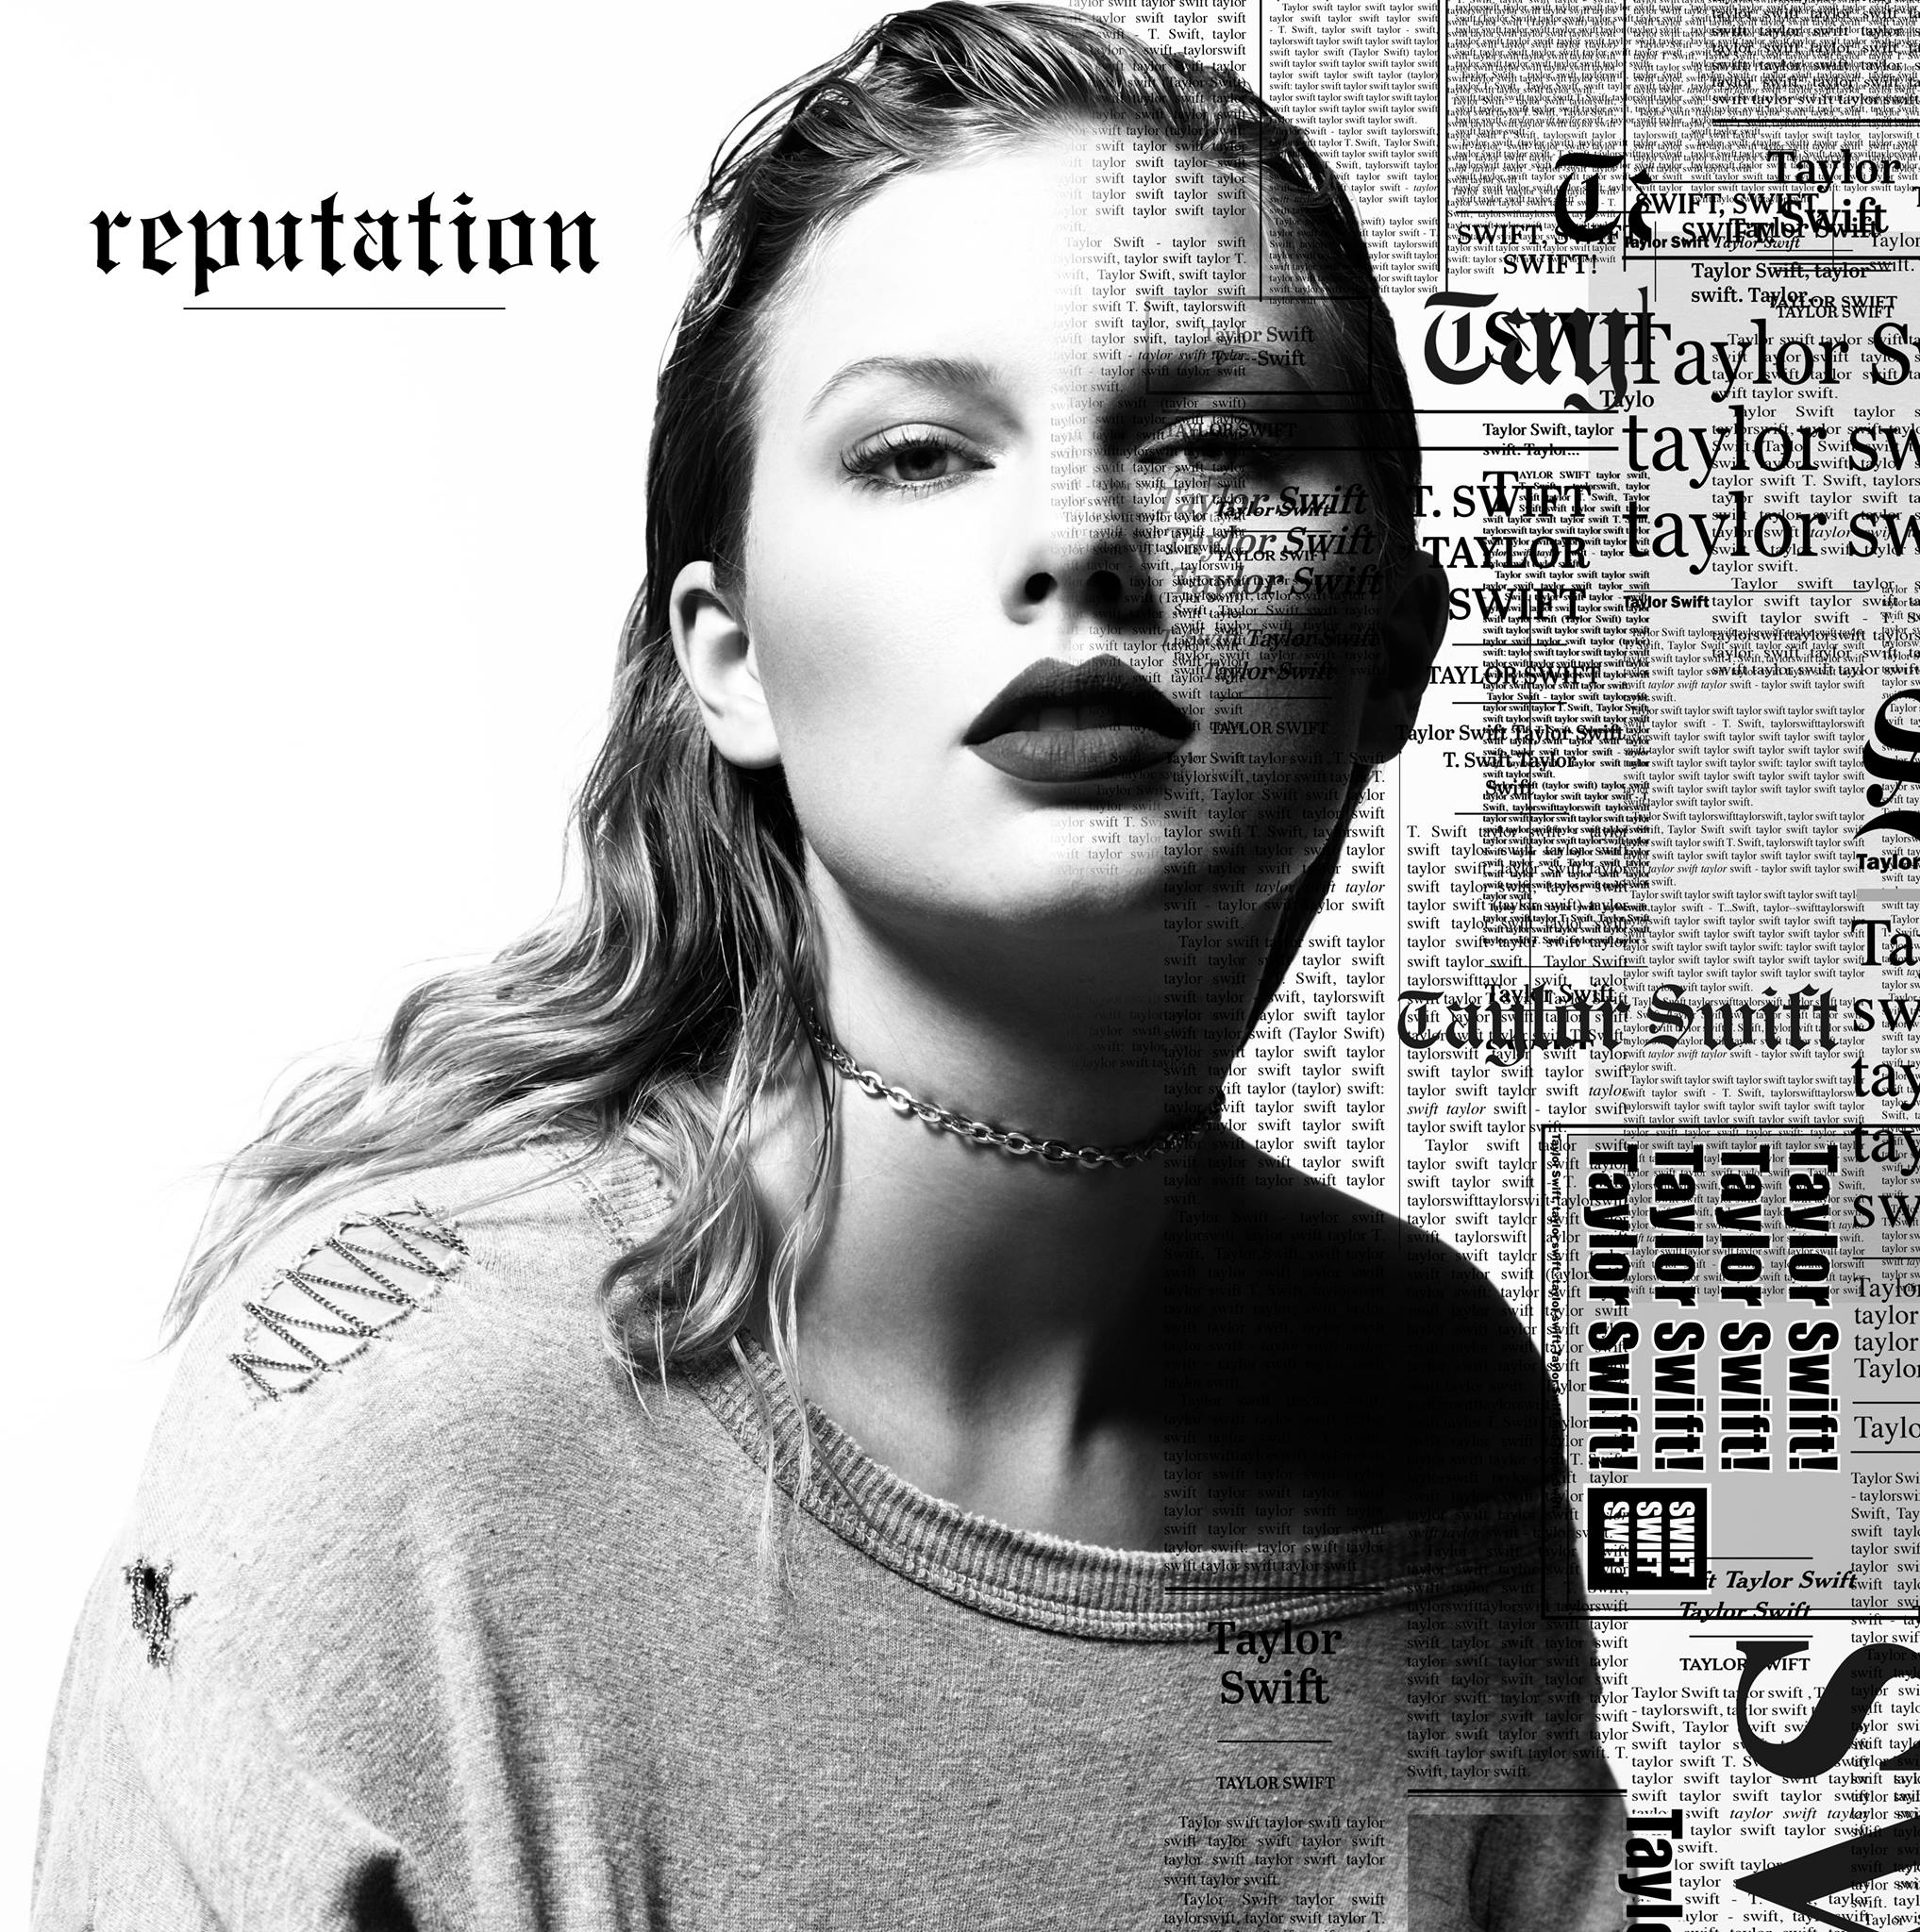 Taylor Swift releases 6th album title 'Reputation' and artwork